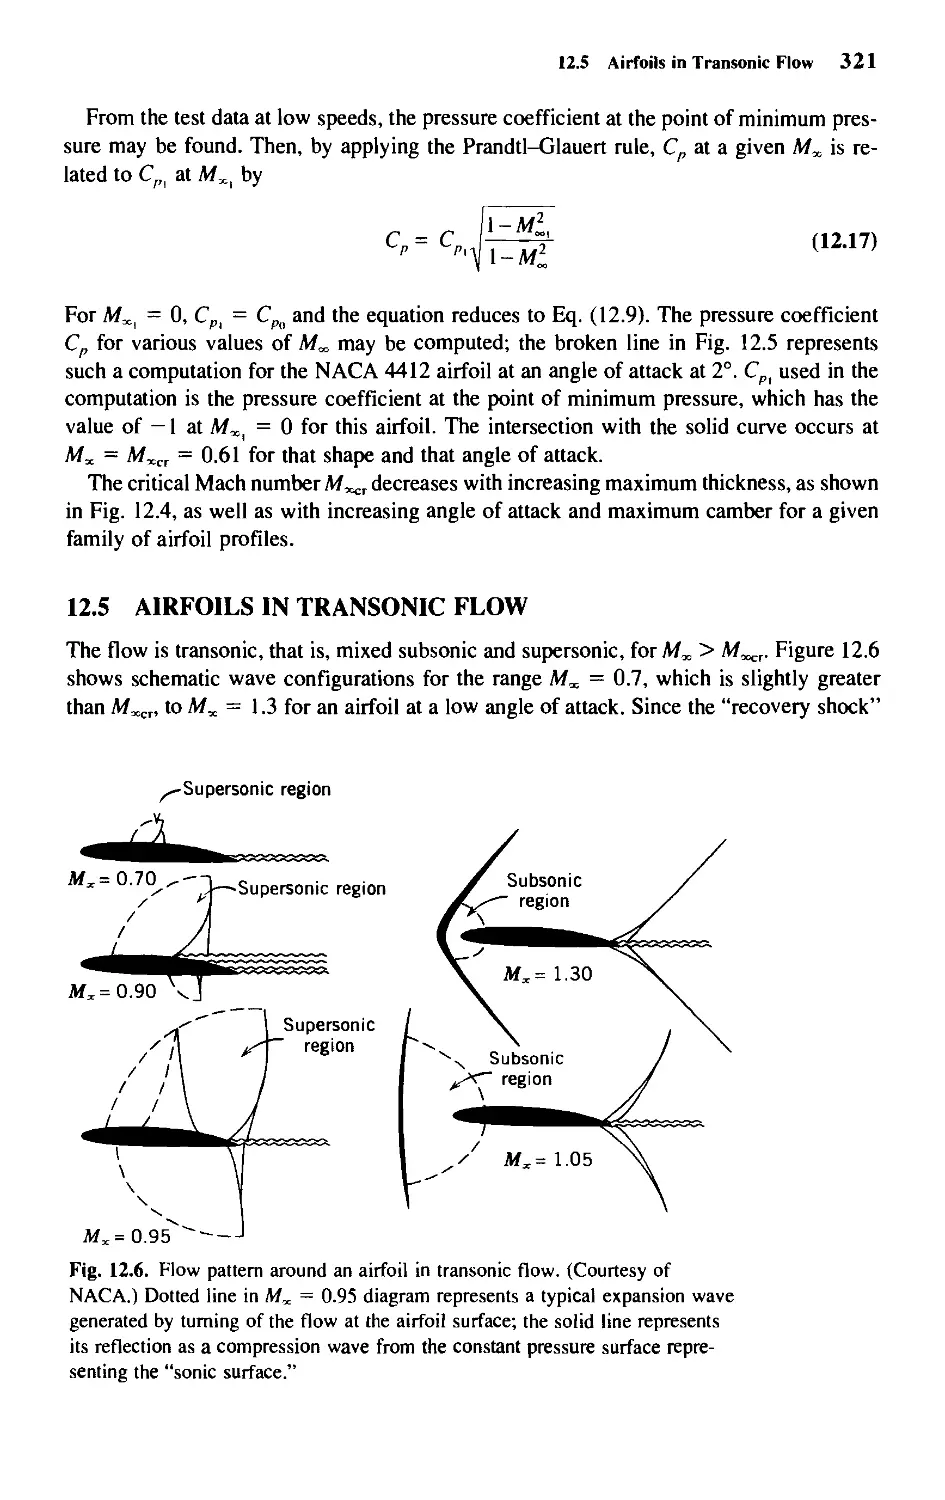 12.5 - Airfoils in Transonic Flow